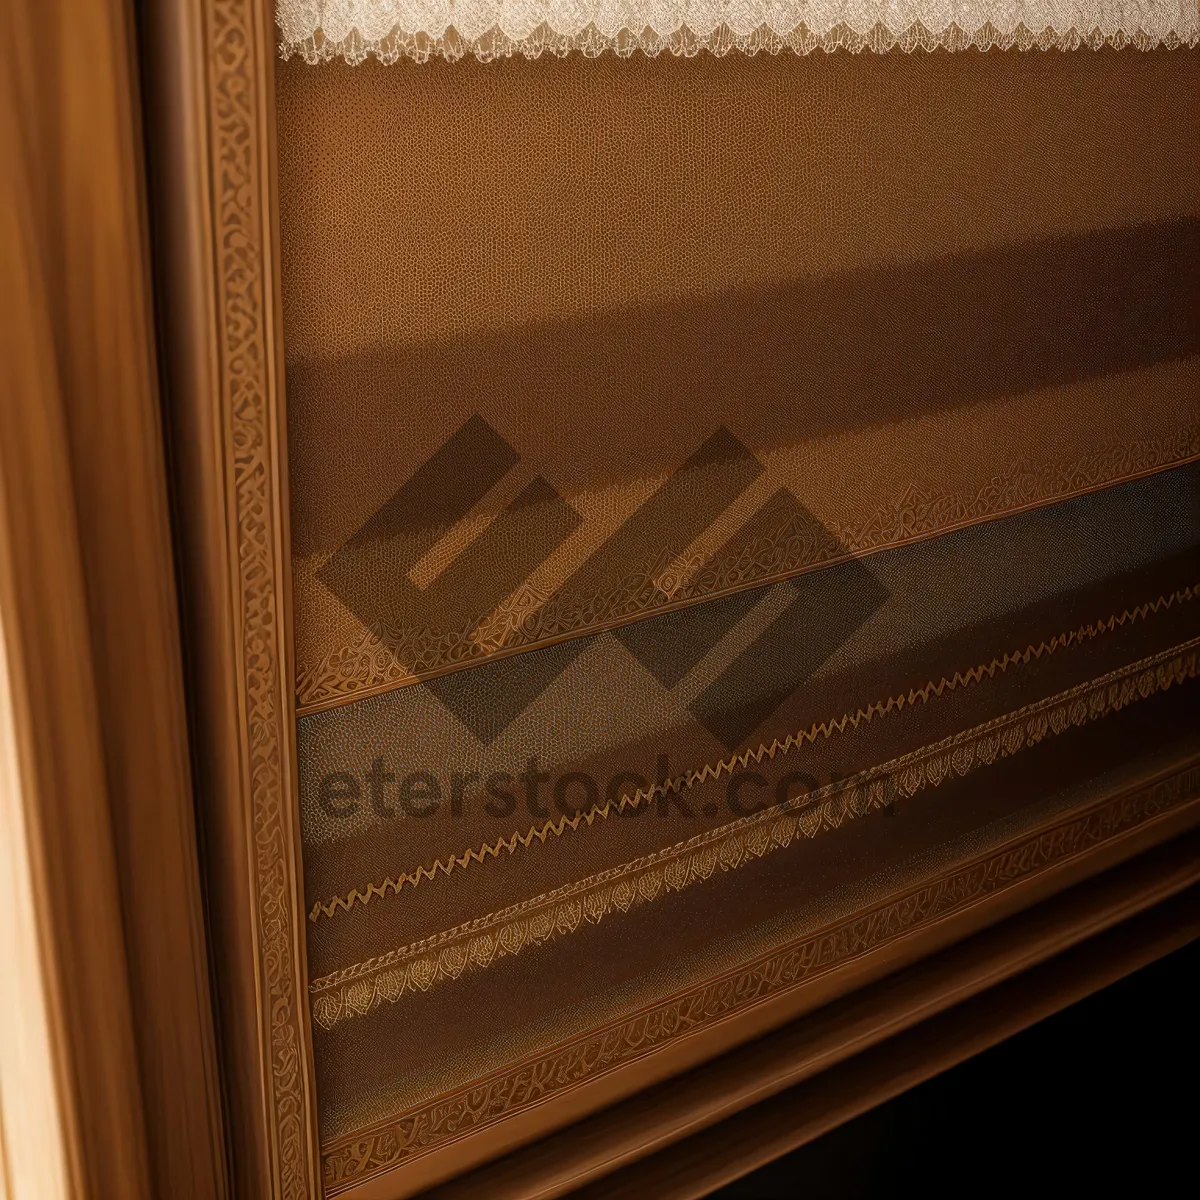 Picture of Vintage Wood Window Blind with Grunge Texture